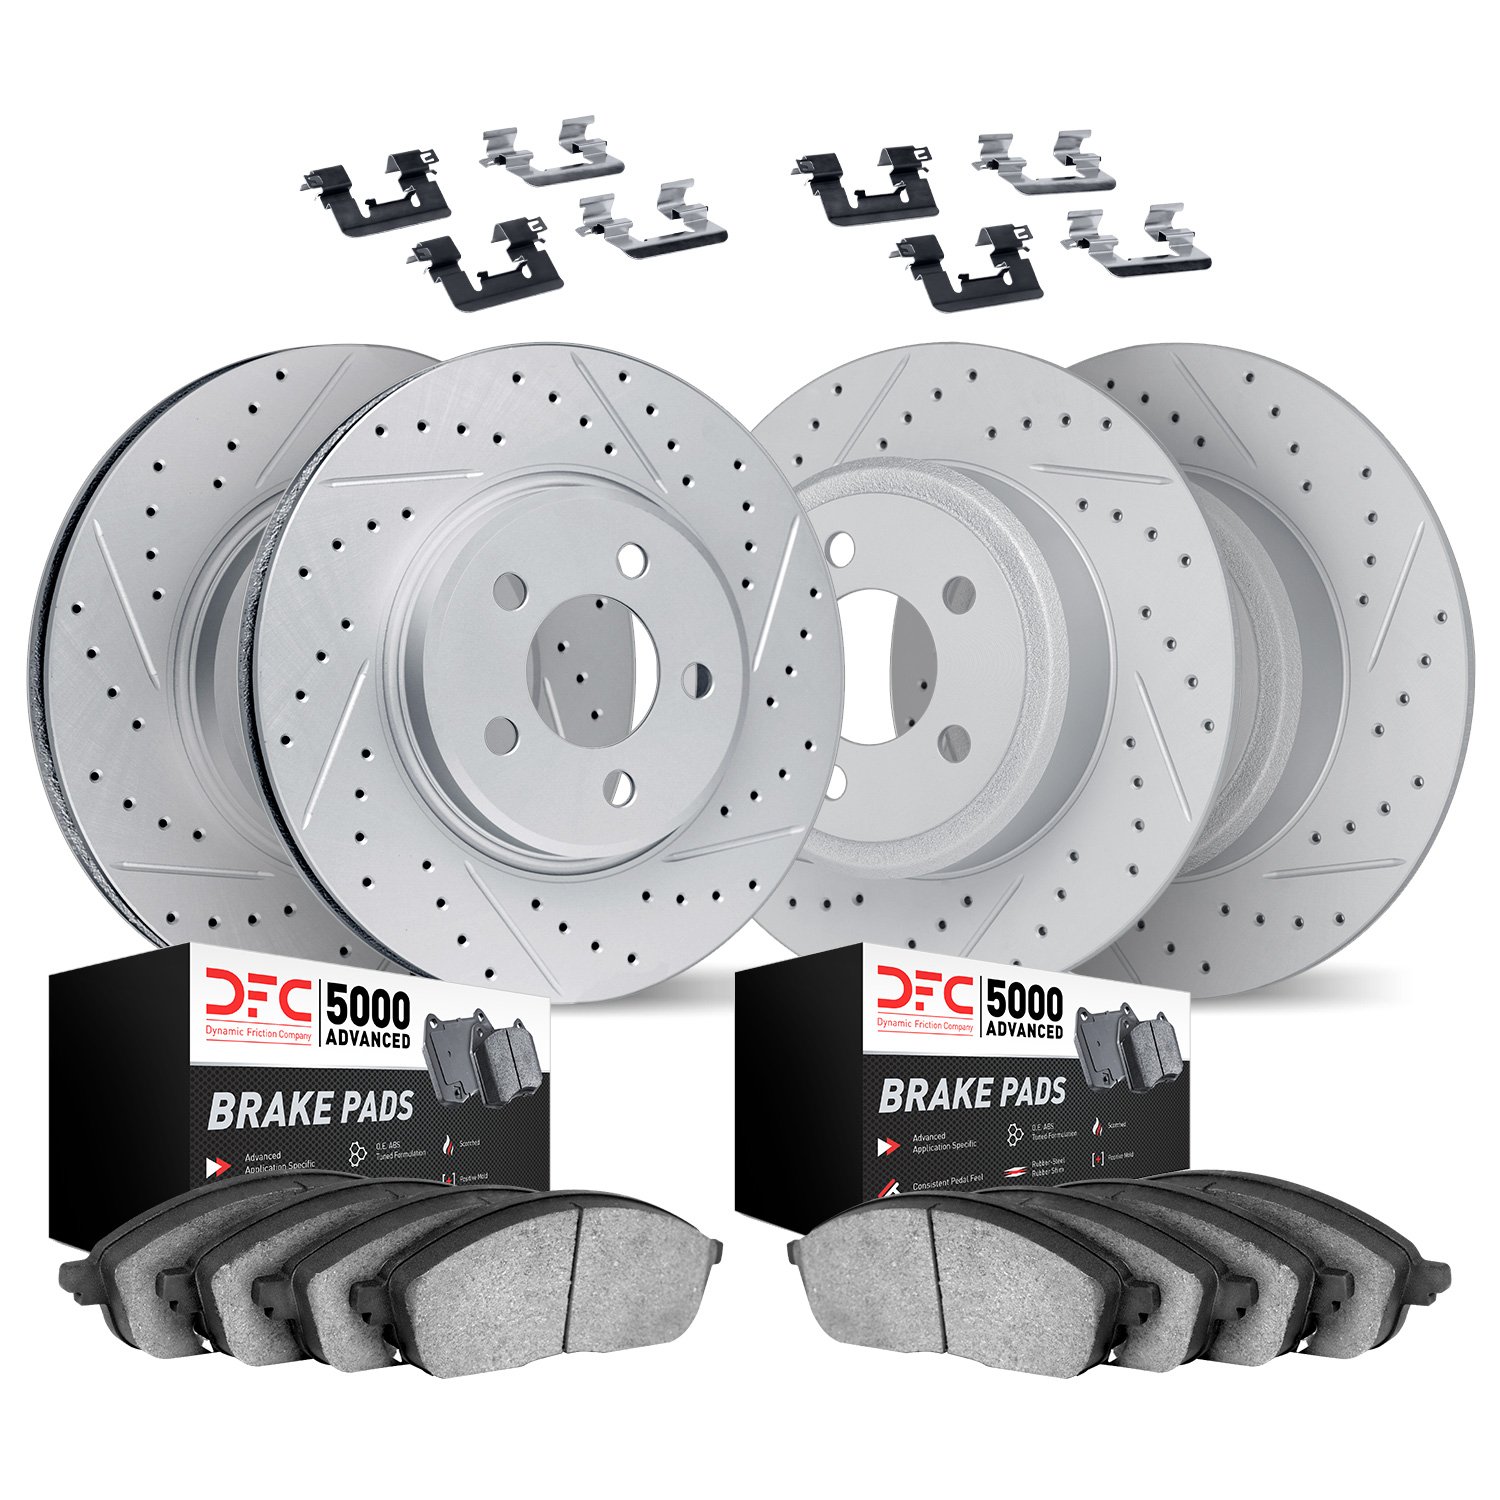 2514-11007 Geoperformance Drilled/Slotted Rotors w/5000 Advanced Brake Pads Kit & Hardware, 2003-2005 Land Rover, Position: Fron